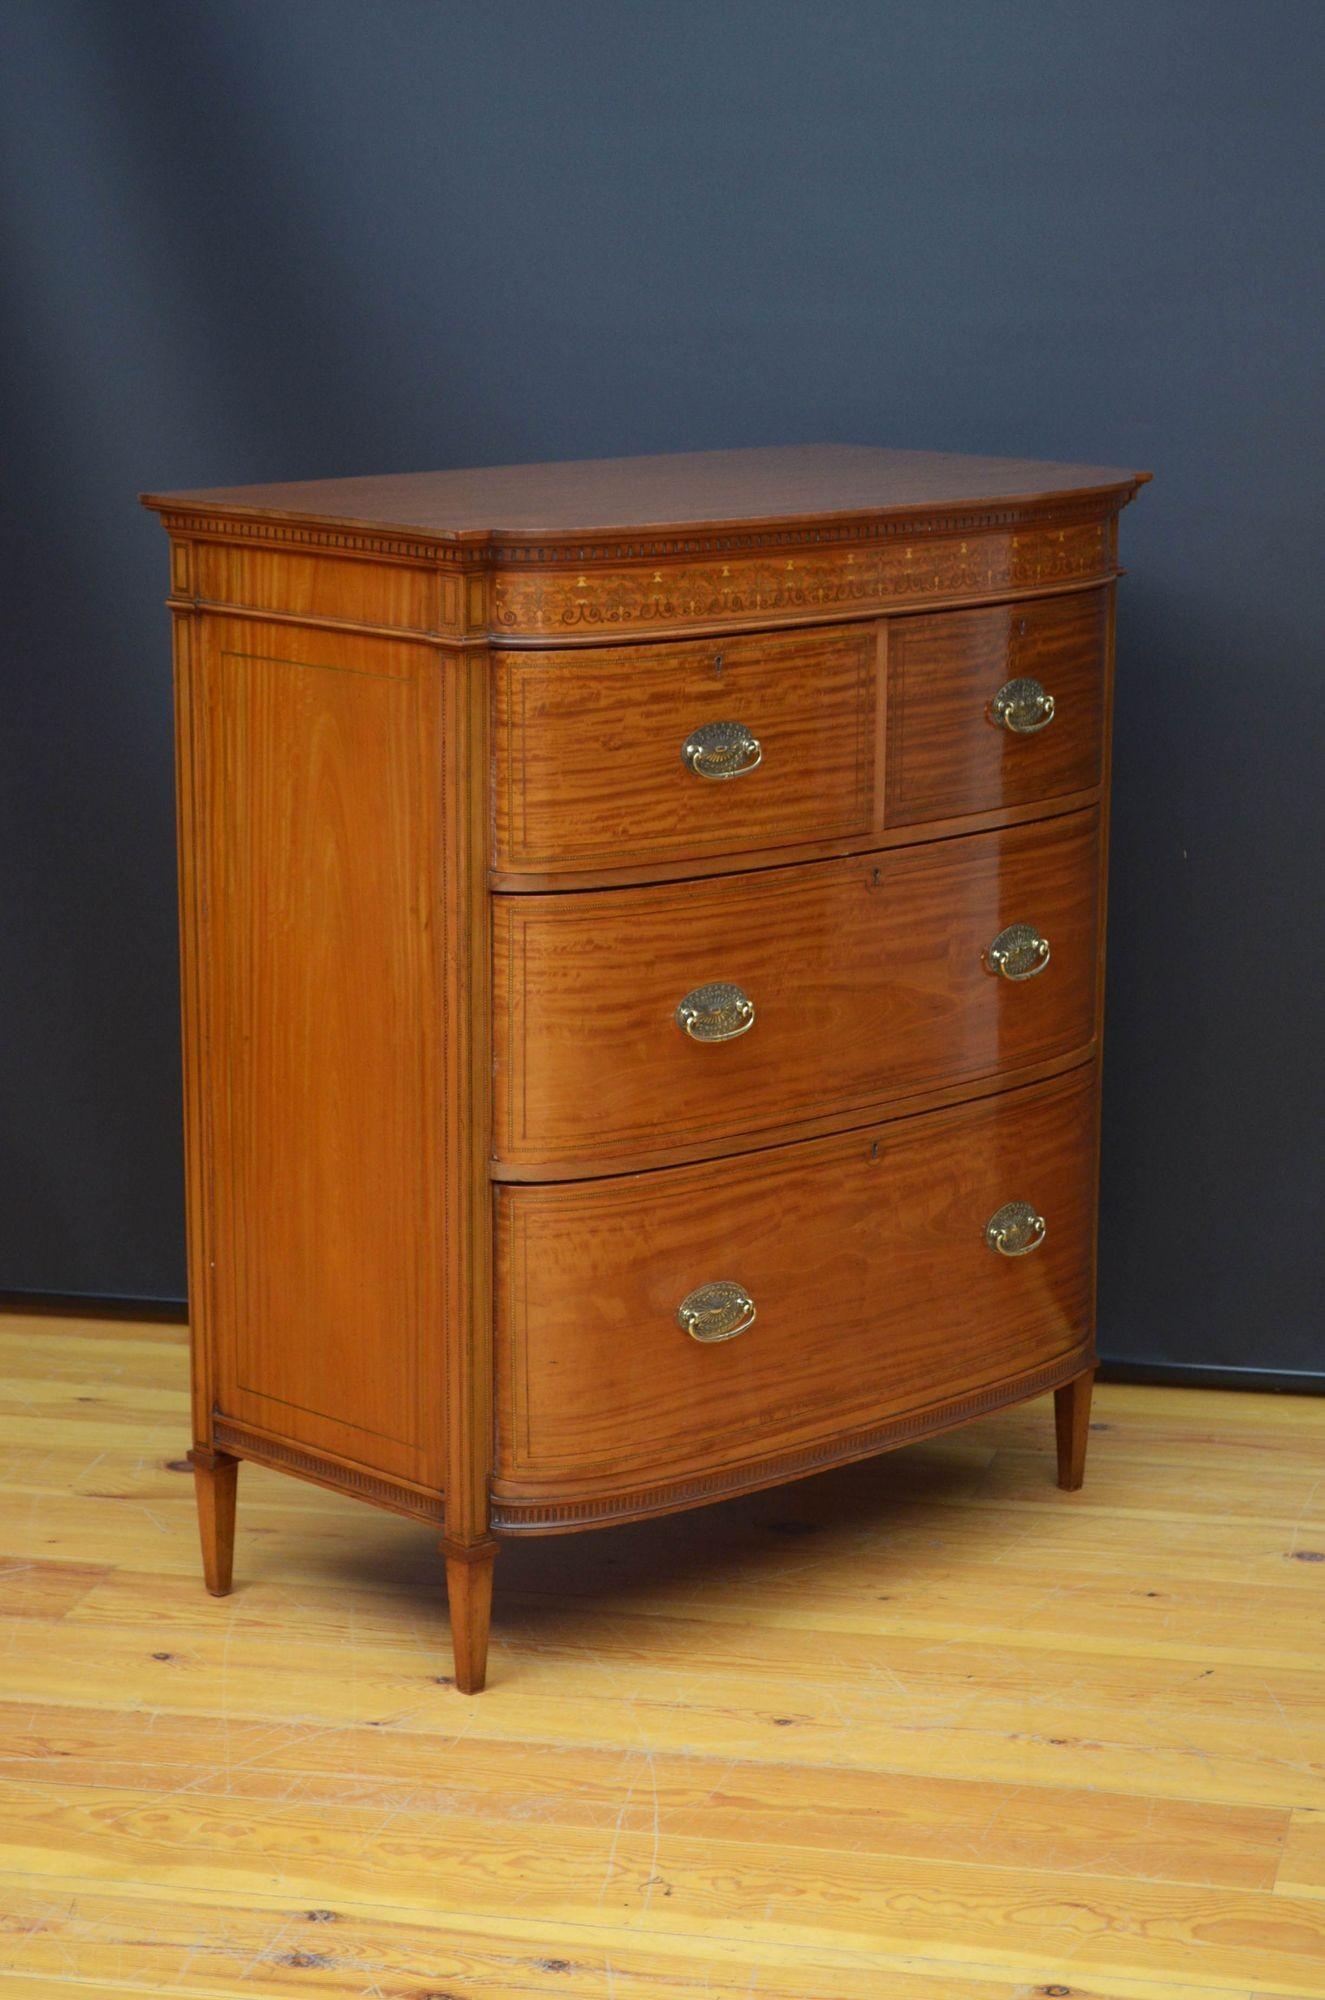 Finest Quality Sheraton Revival Satinwood Chest of Drawers In Good Condition For Sale In Whaley Bridge, GB